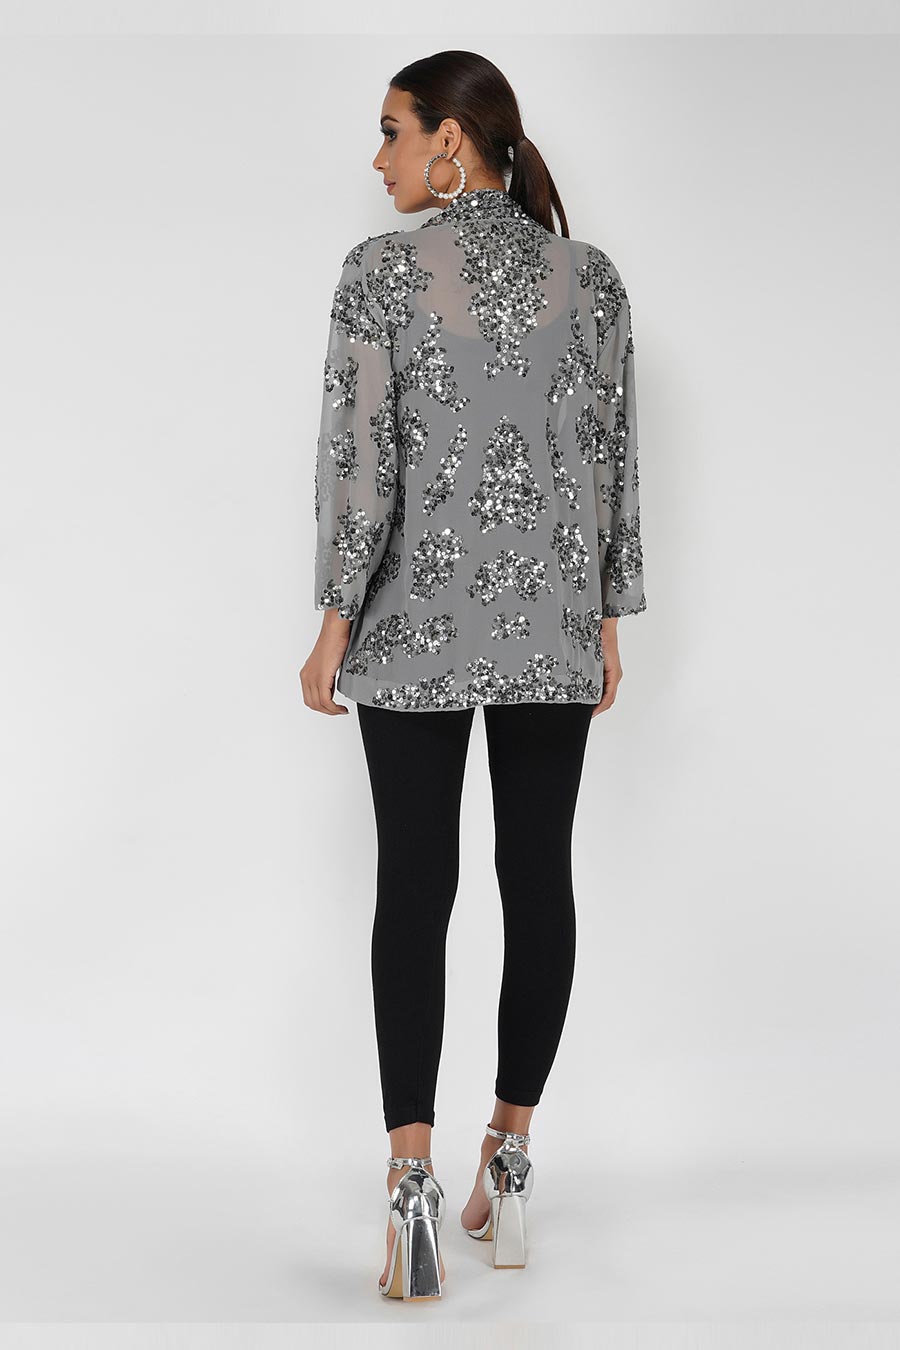 Sequin Embroidered Grey Shrug